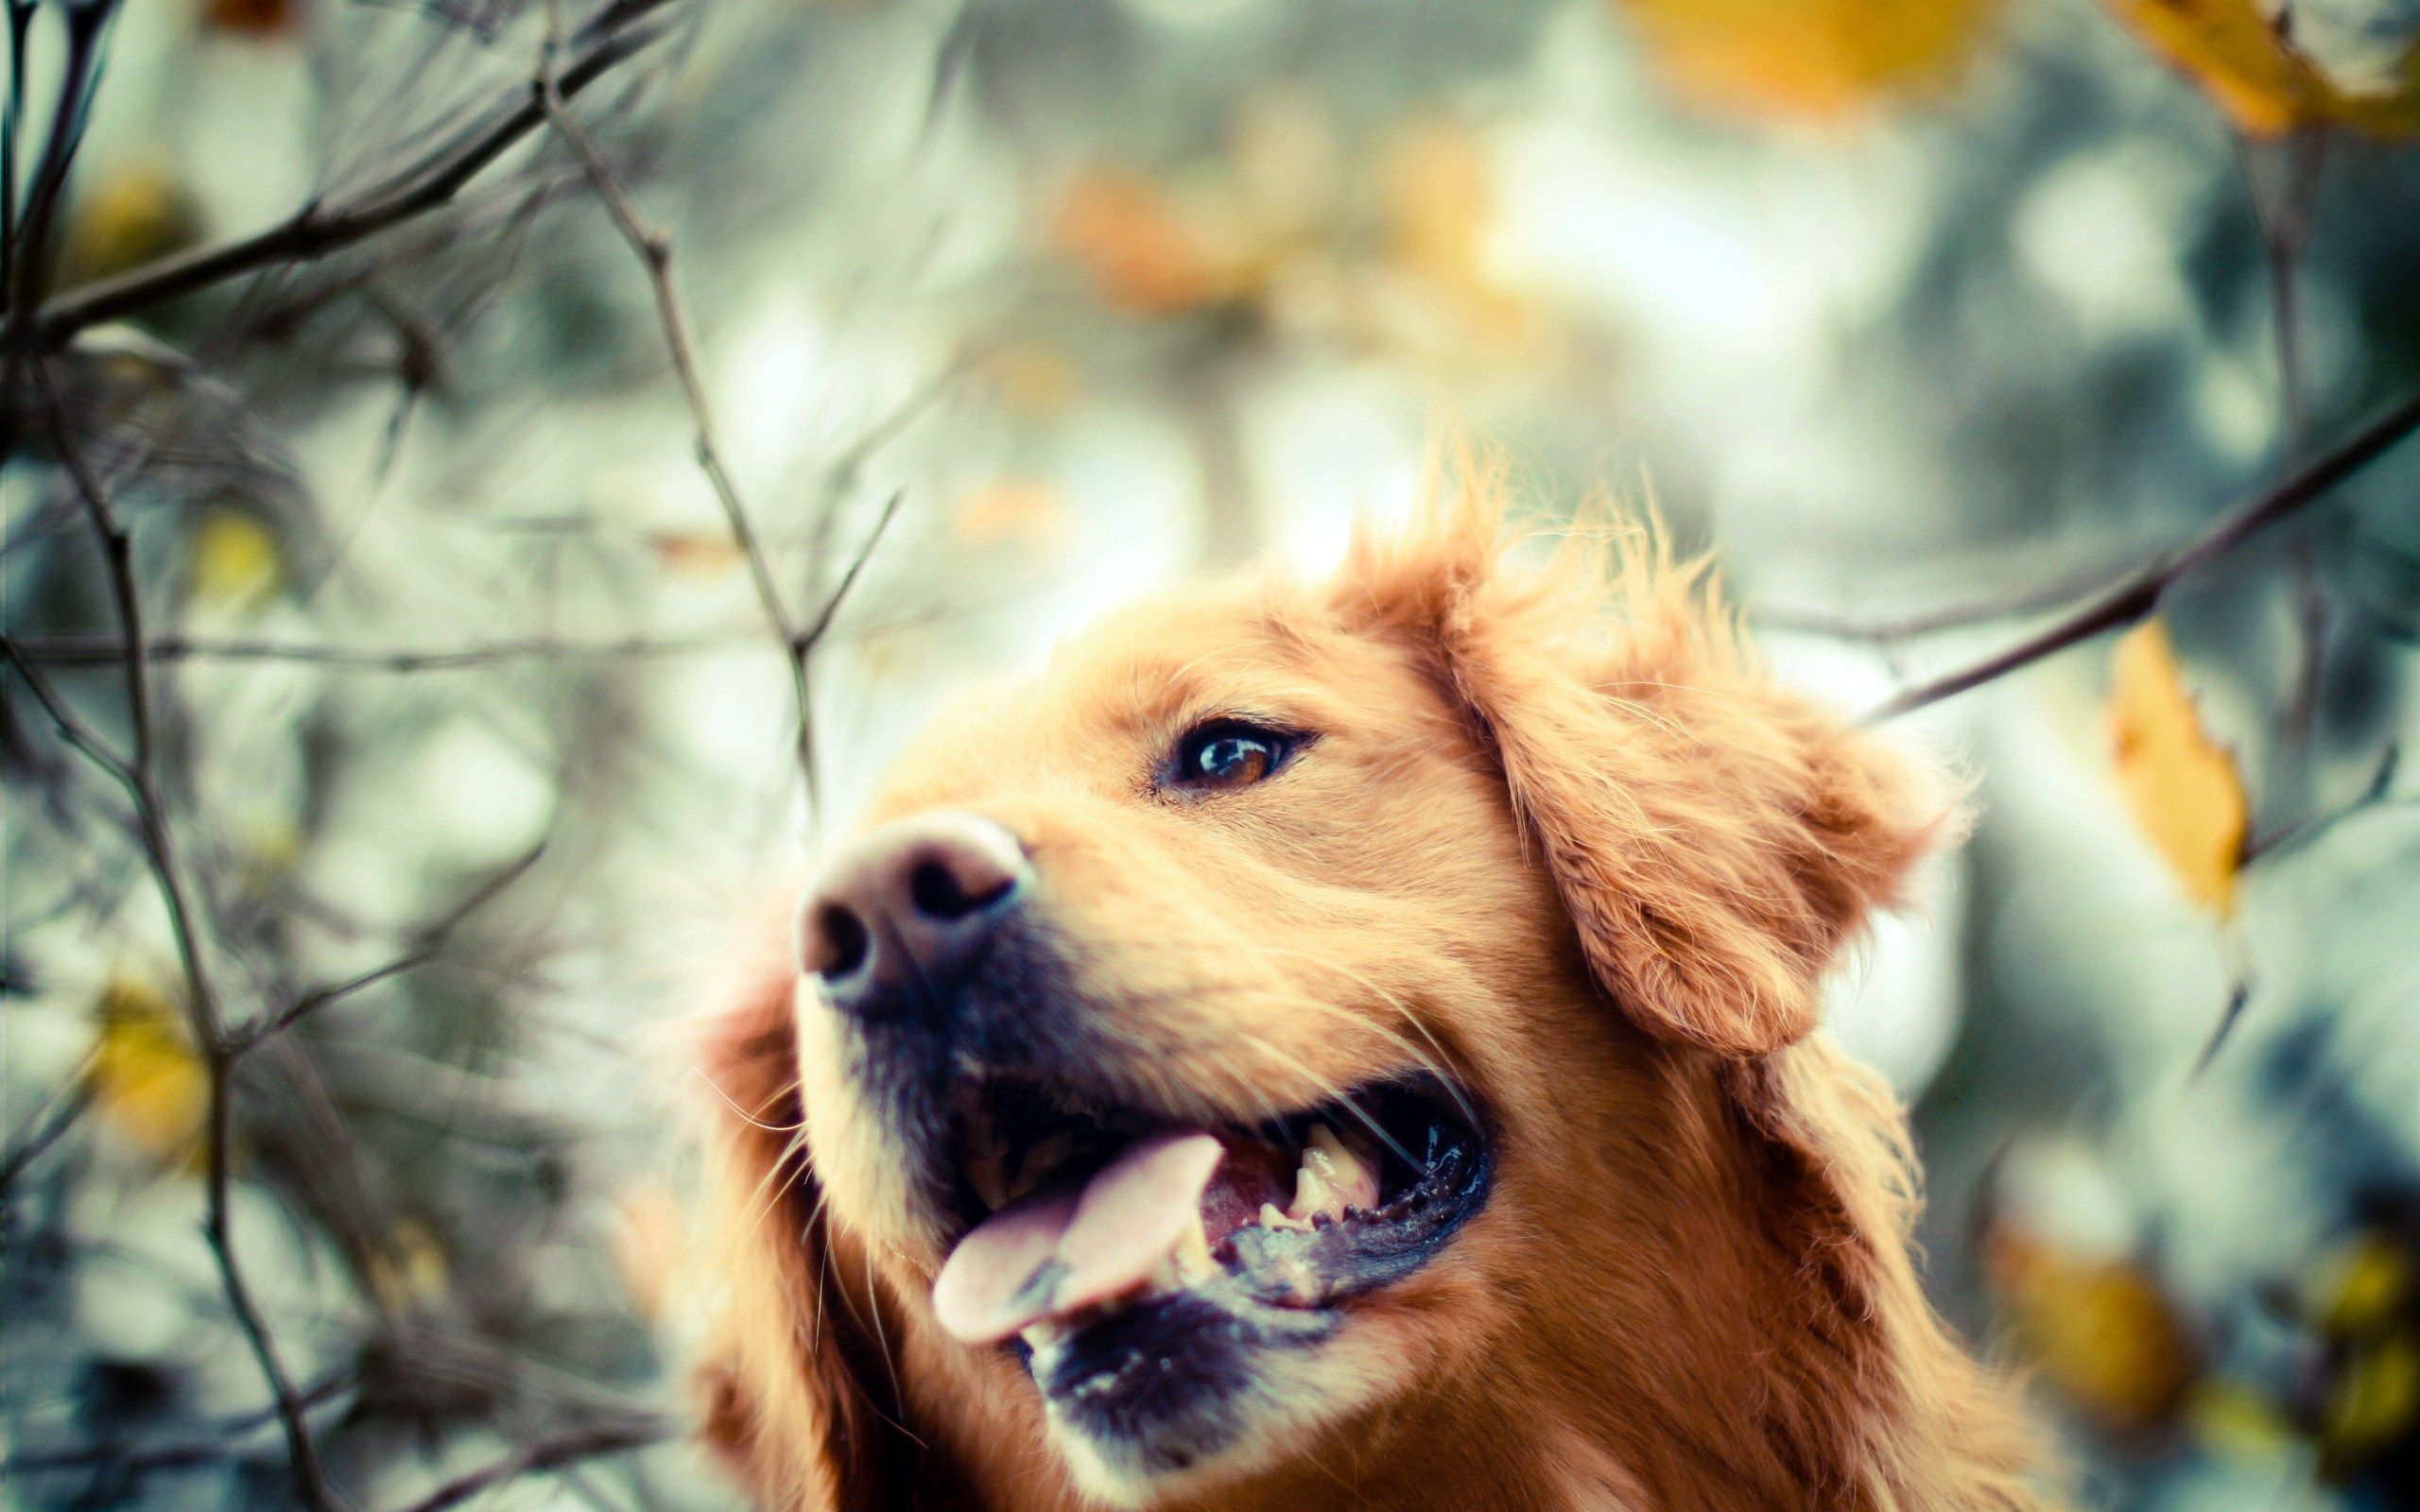 Download Wallpaper Golden Retriever, Close Up, Labrador, Autumn, Dogs, Pets, Cute Dogs, Golden Retriever Dogs For Desktop With Resolution 2560x1600. High Quality HD Picture Wallpaper